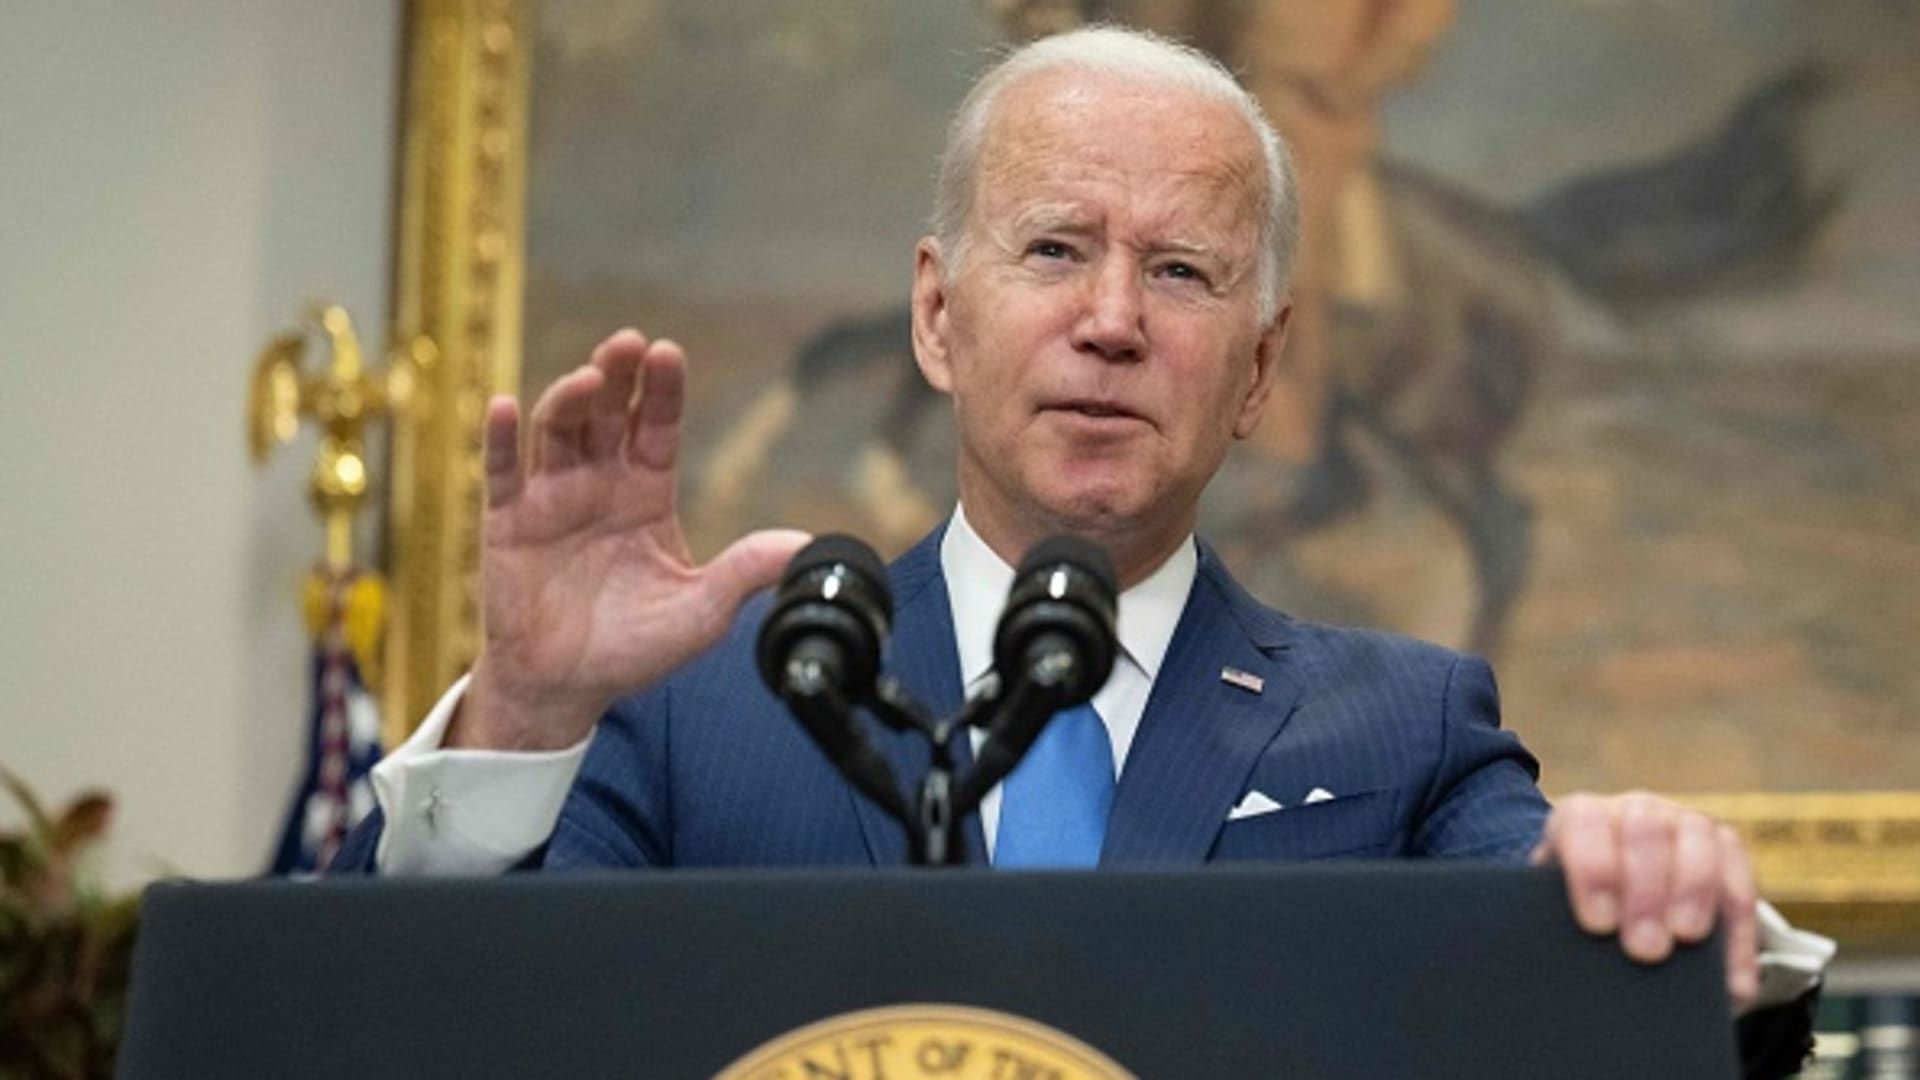 Watch live: Biden speaks on the economy and job growth ahead of major Fed rate decision – CNBC